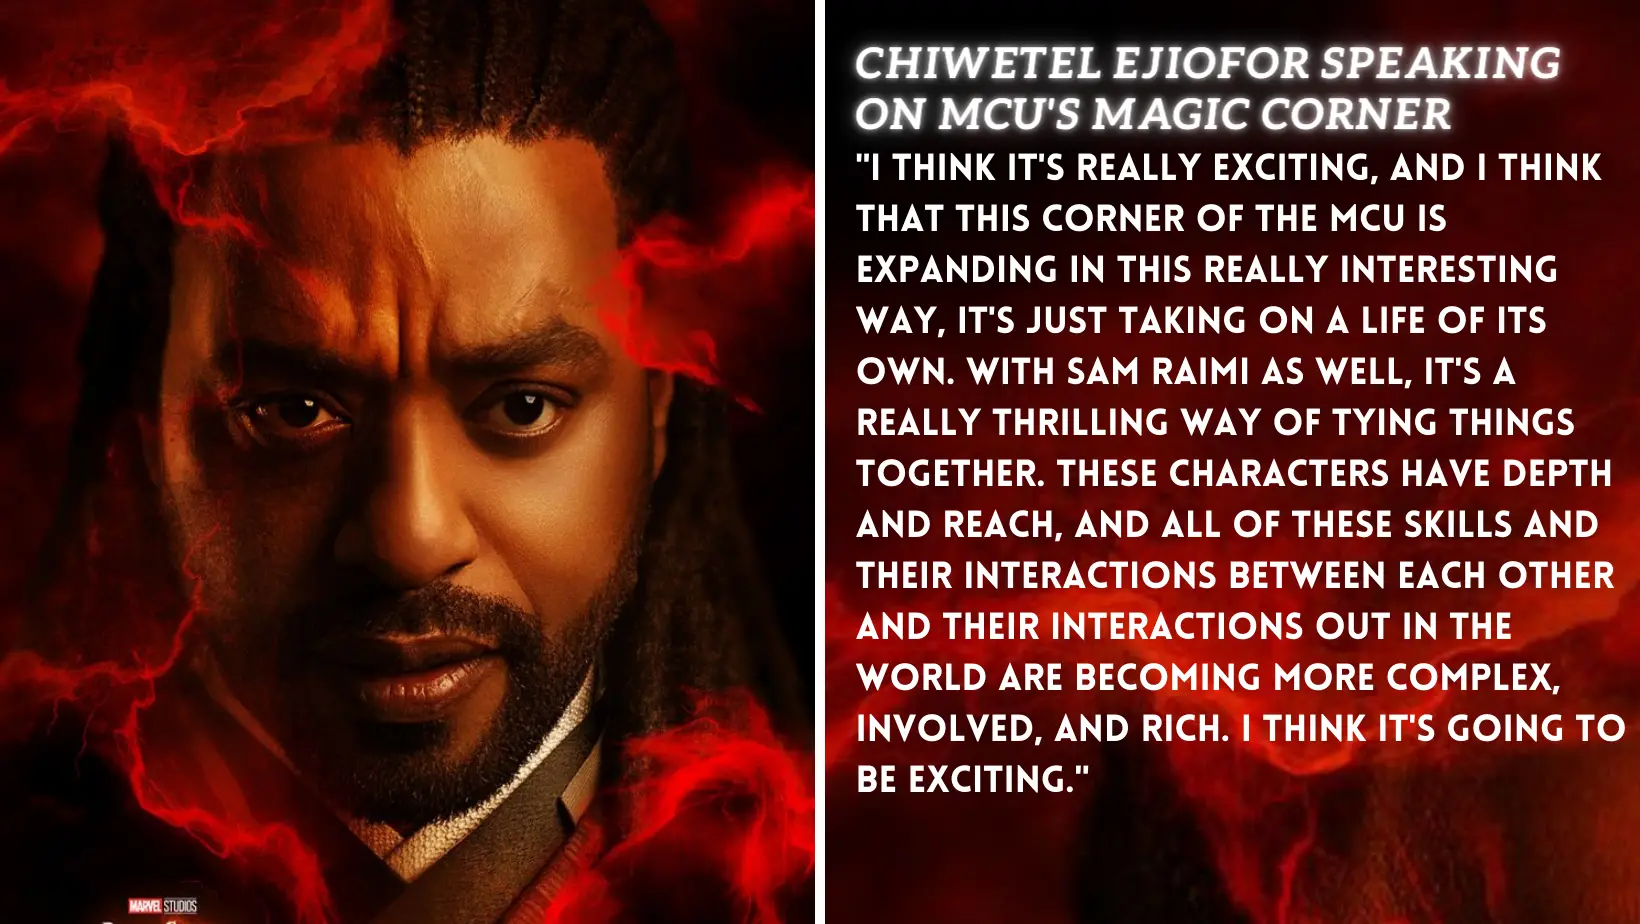 Chiwetel Ejiofor Speaks On Branching Out MCU’s Magical Realm